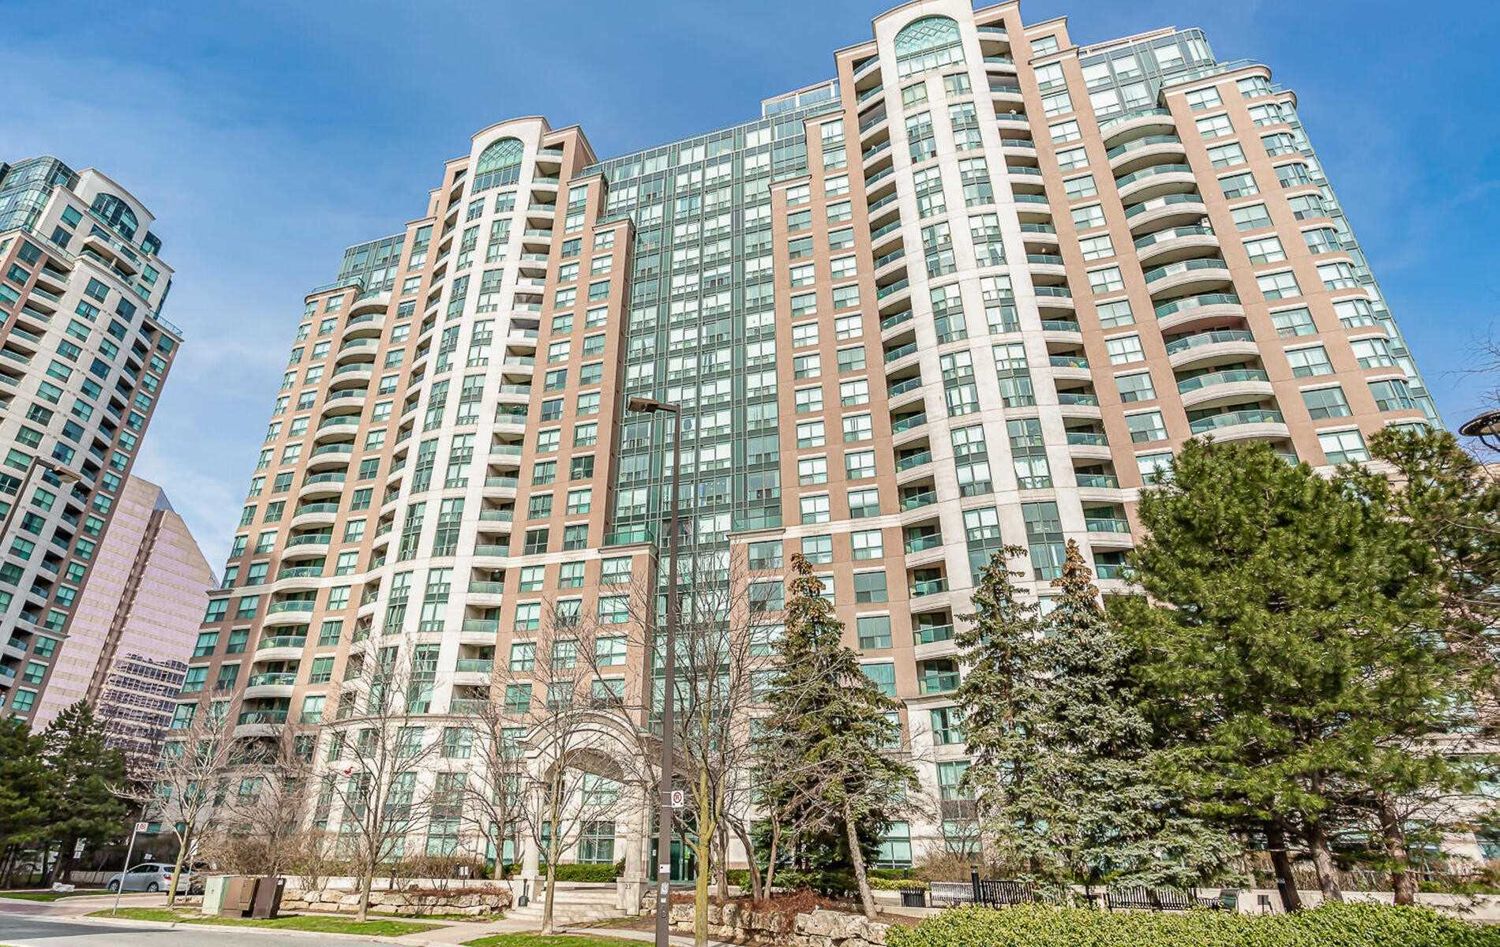 23 Lorraine Drive. Symphony Square Condos is located in  North York, Toronto - image #2 of 3